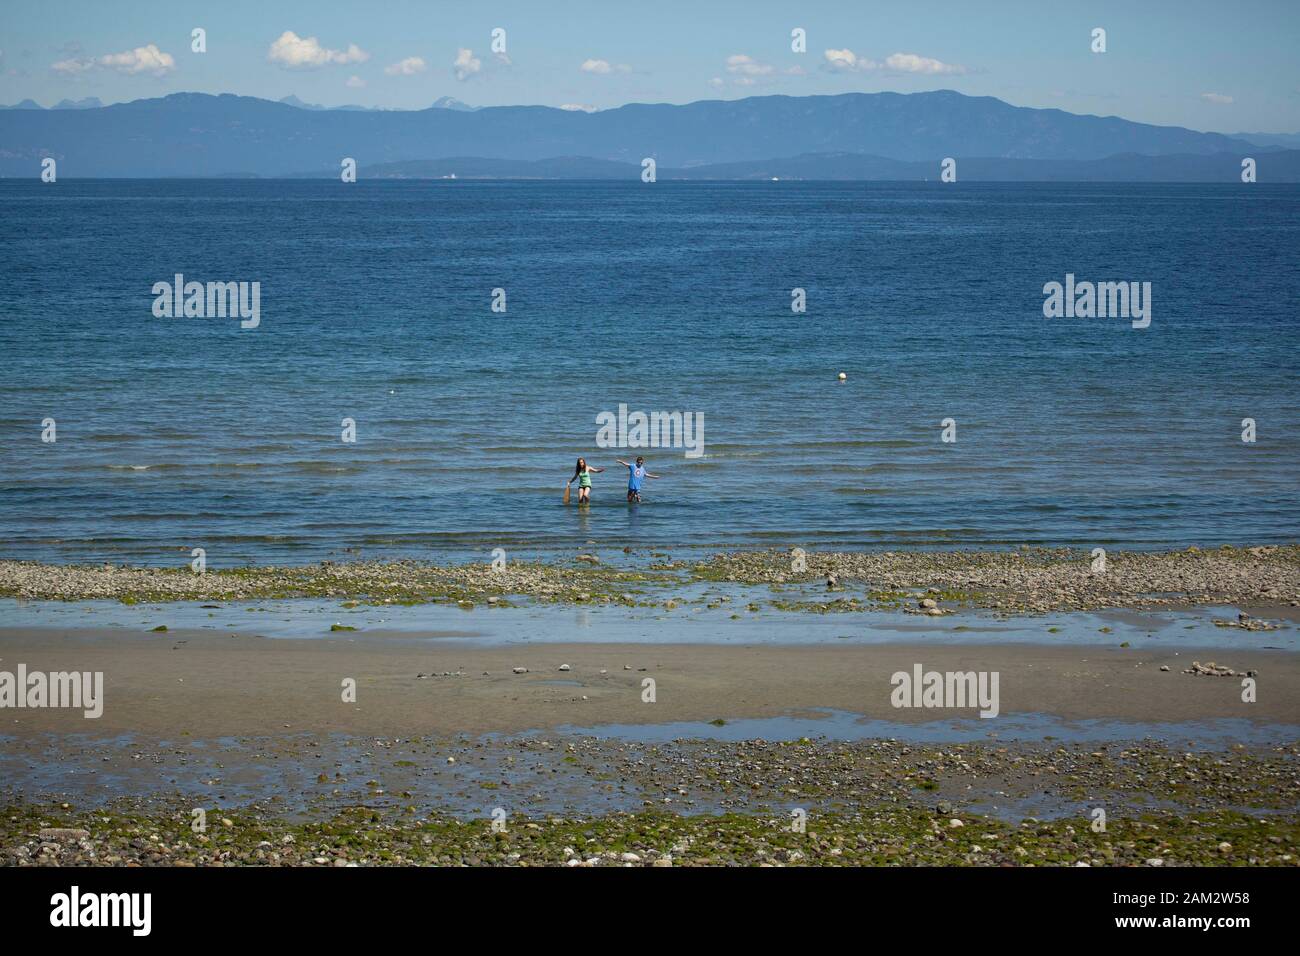 Young woman and boy wading in from sea towards pebbly beach, Vancouver Island, British Columbia, Canada Stock Photo